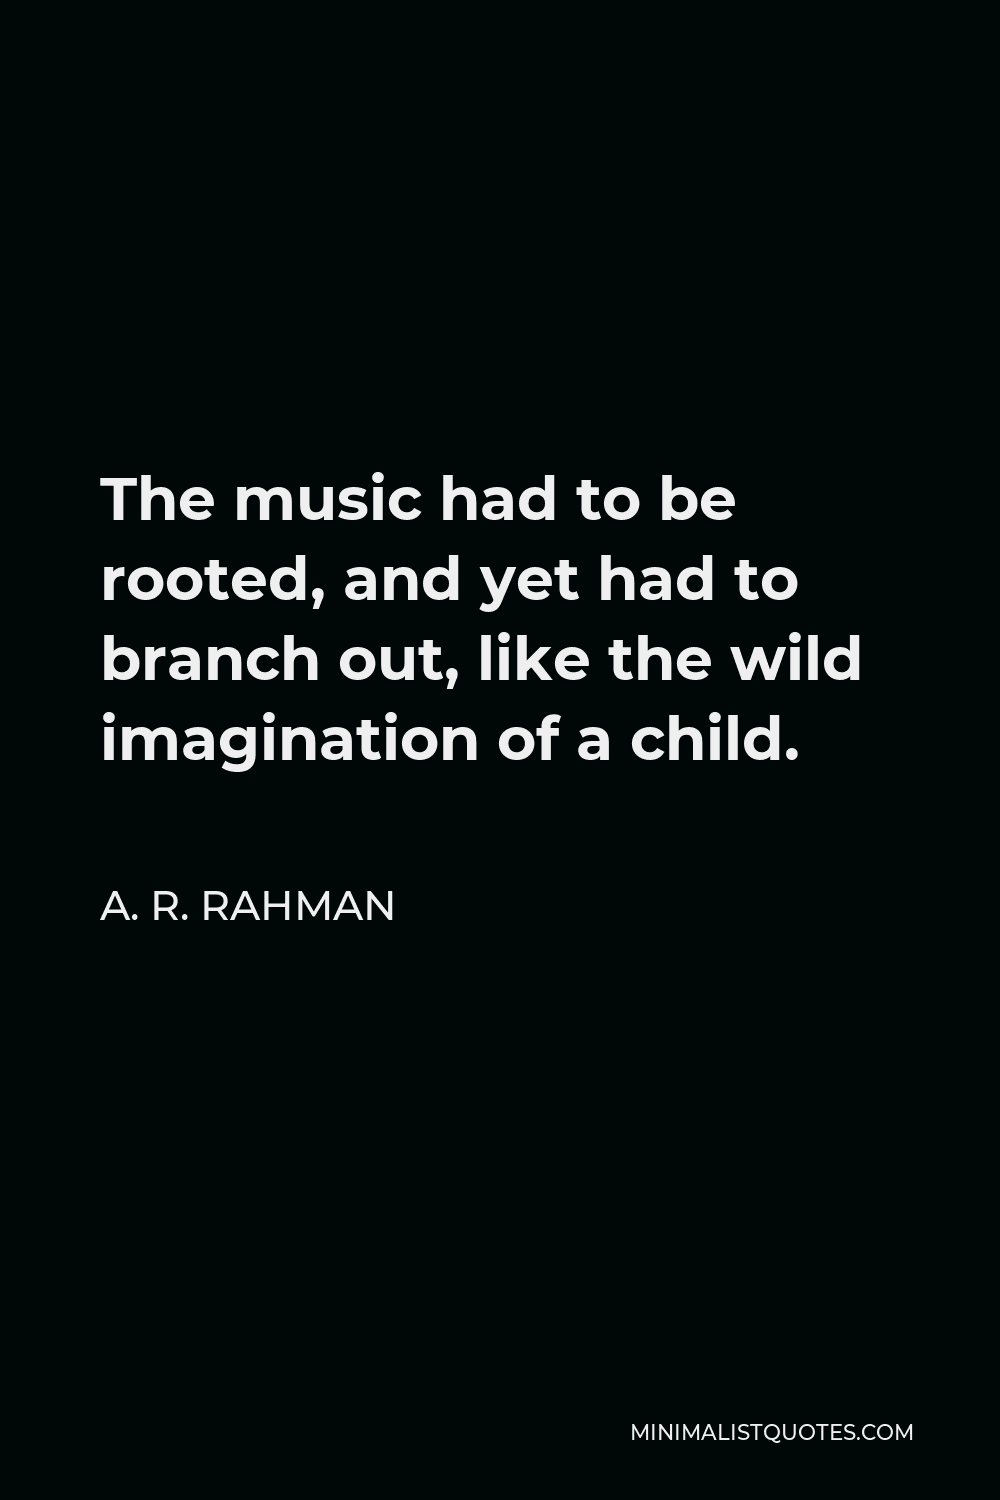 A. R. Rahman Quote - The music had to be rooted, and yet had to branch out, like the wild imagination of a child.